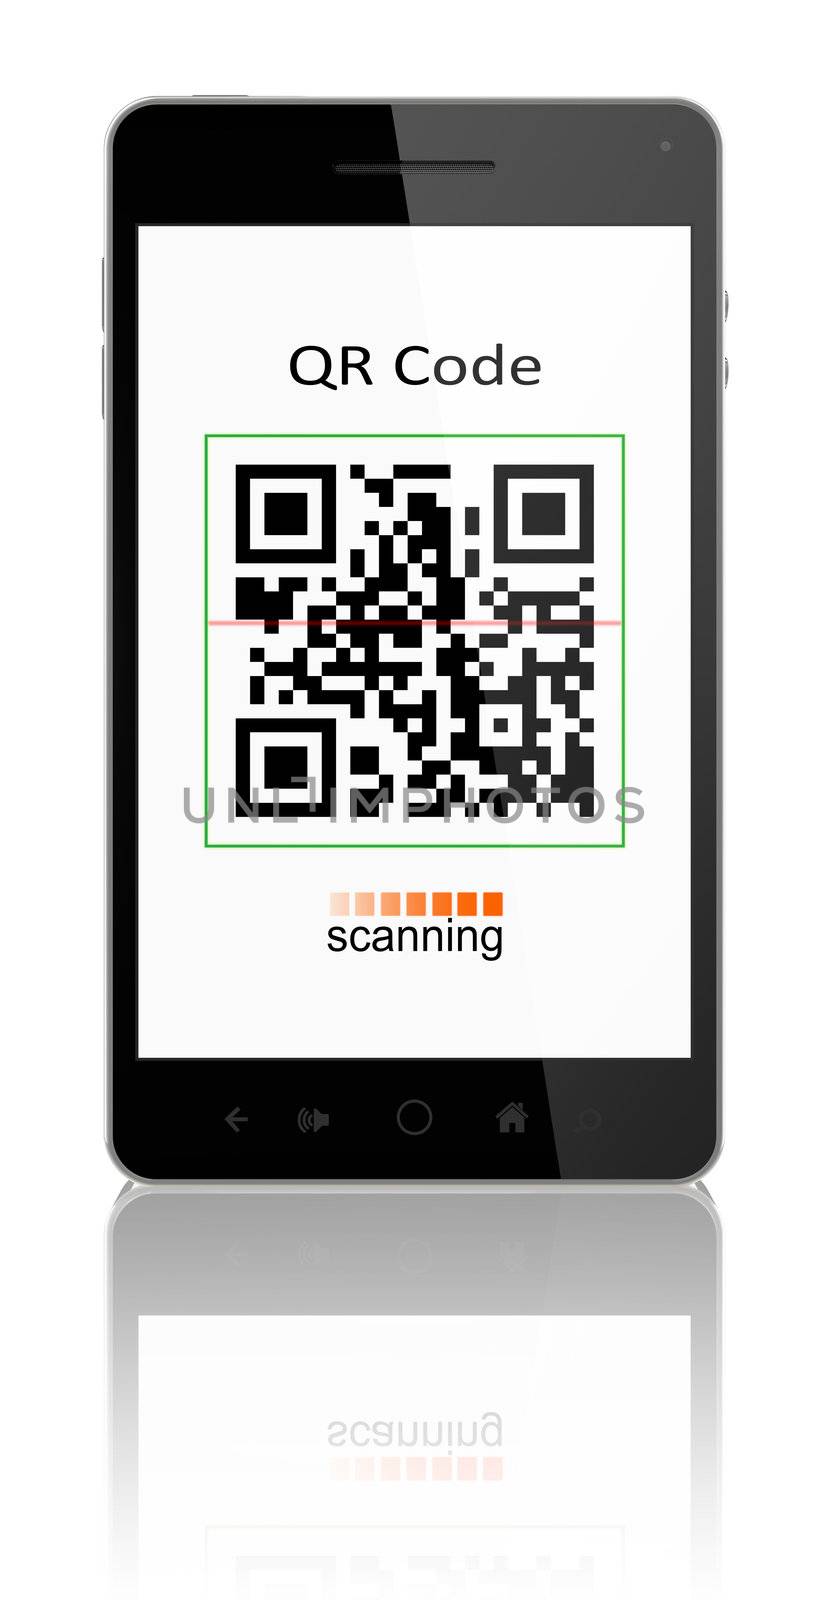 smartphone showing QR code scanner on the screen. Include clipping path for phone and screen.